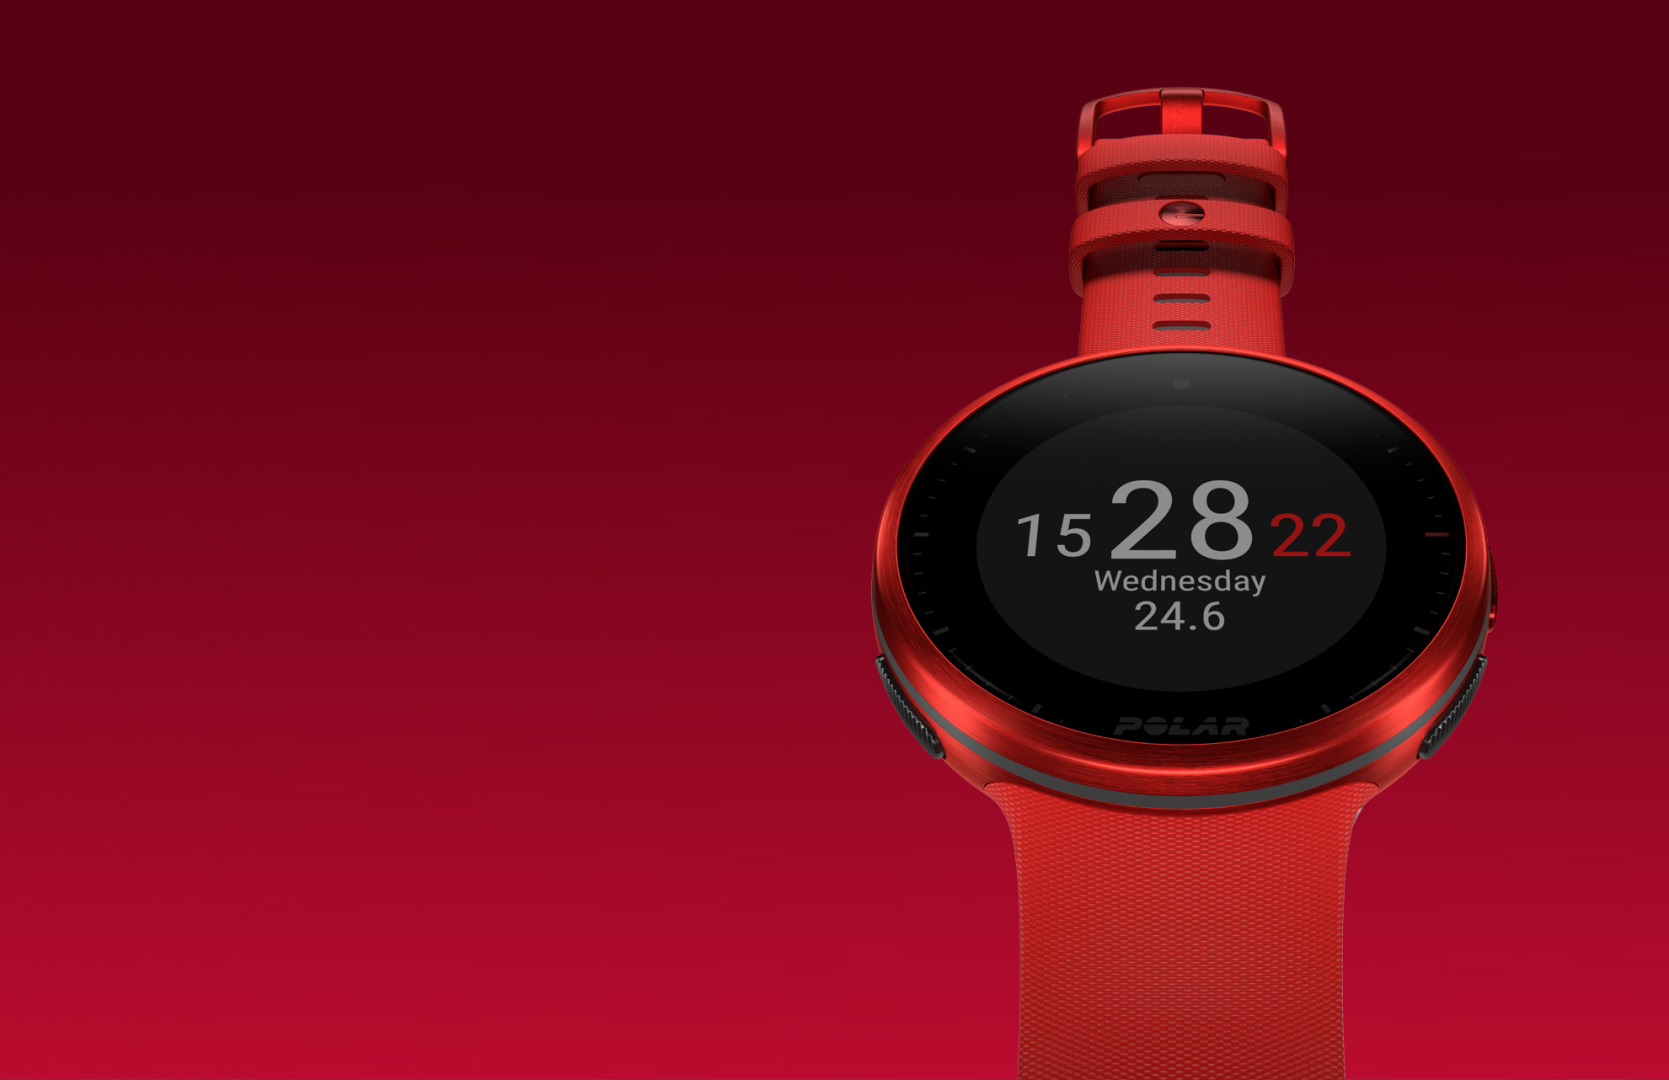 Polar Unite and Vantage V2 smartwatches receive updated sides and current styles